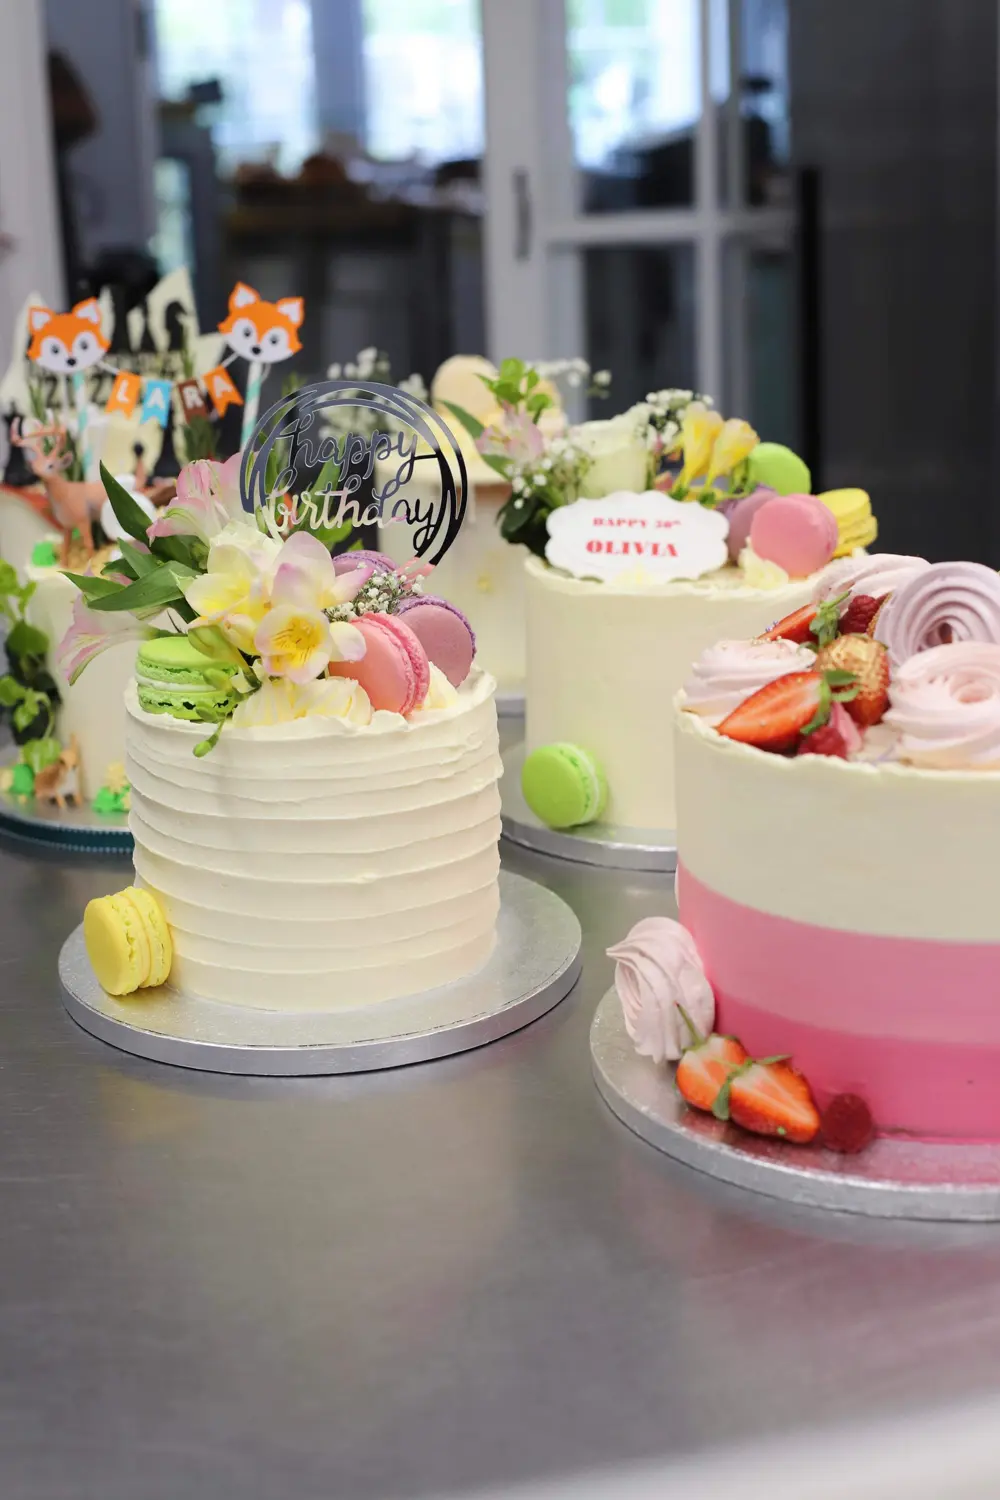 Cakes and patisseries